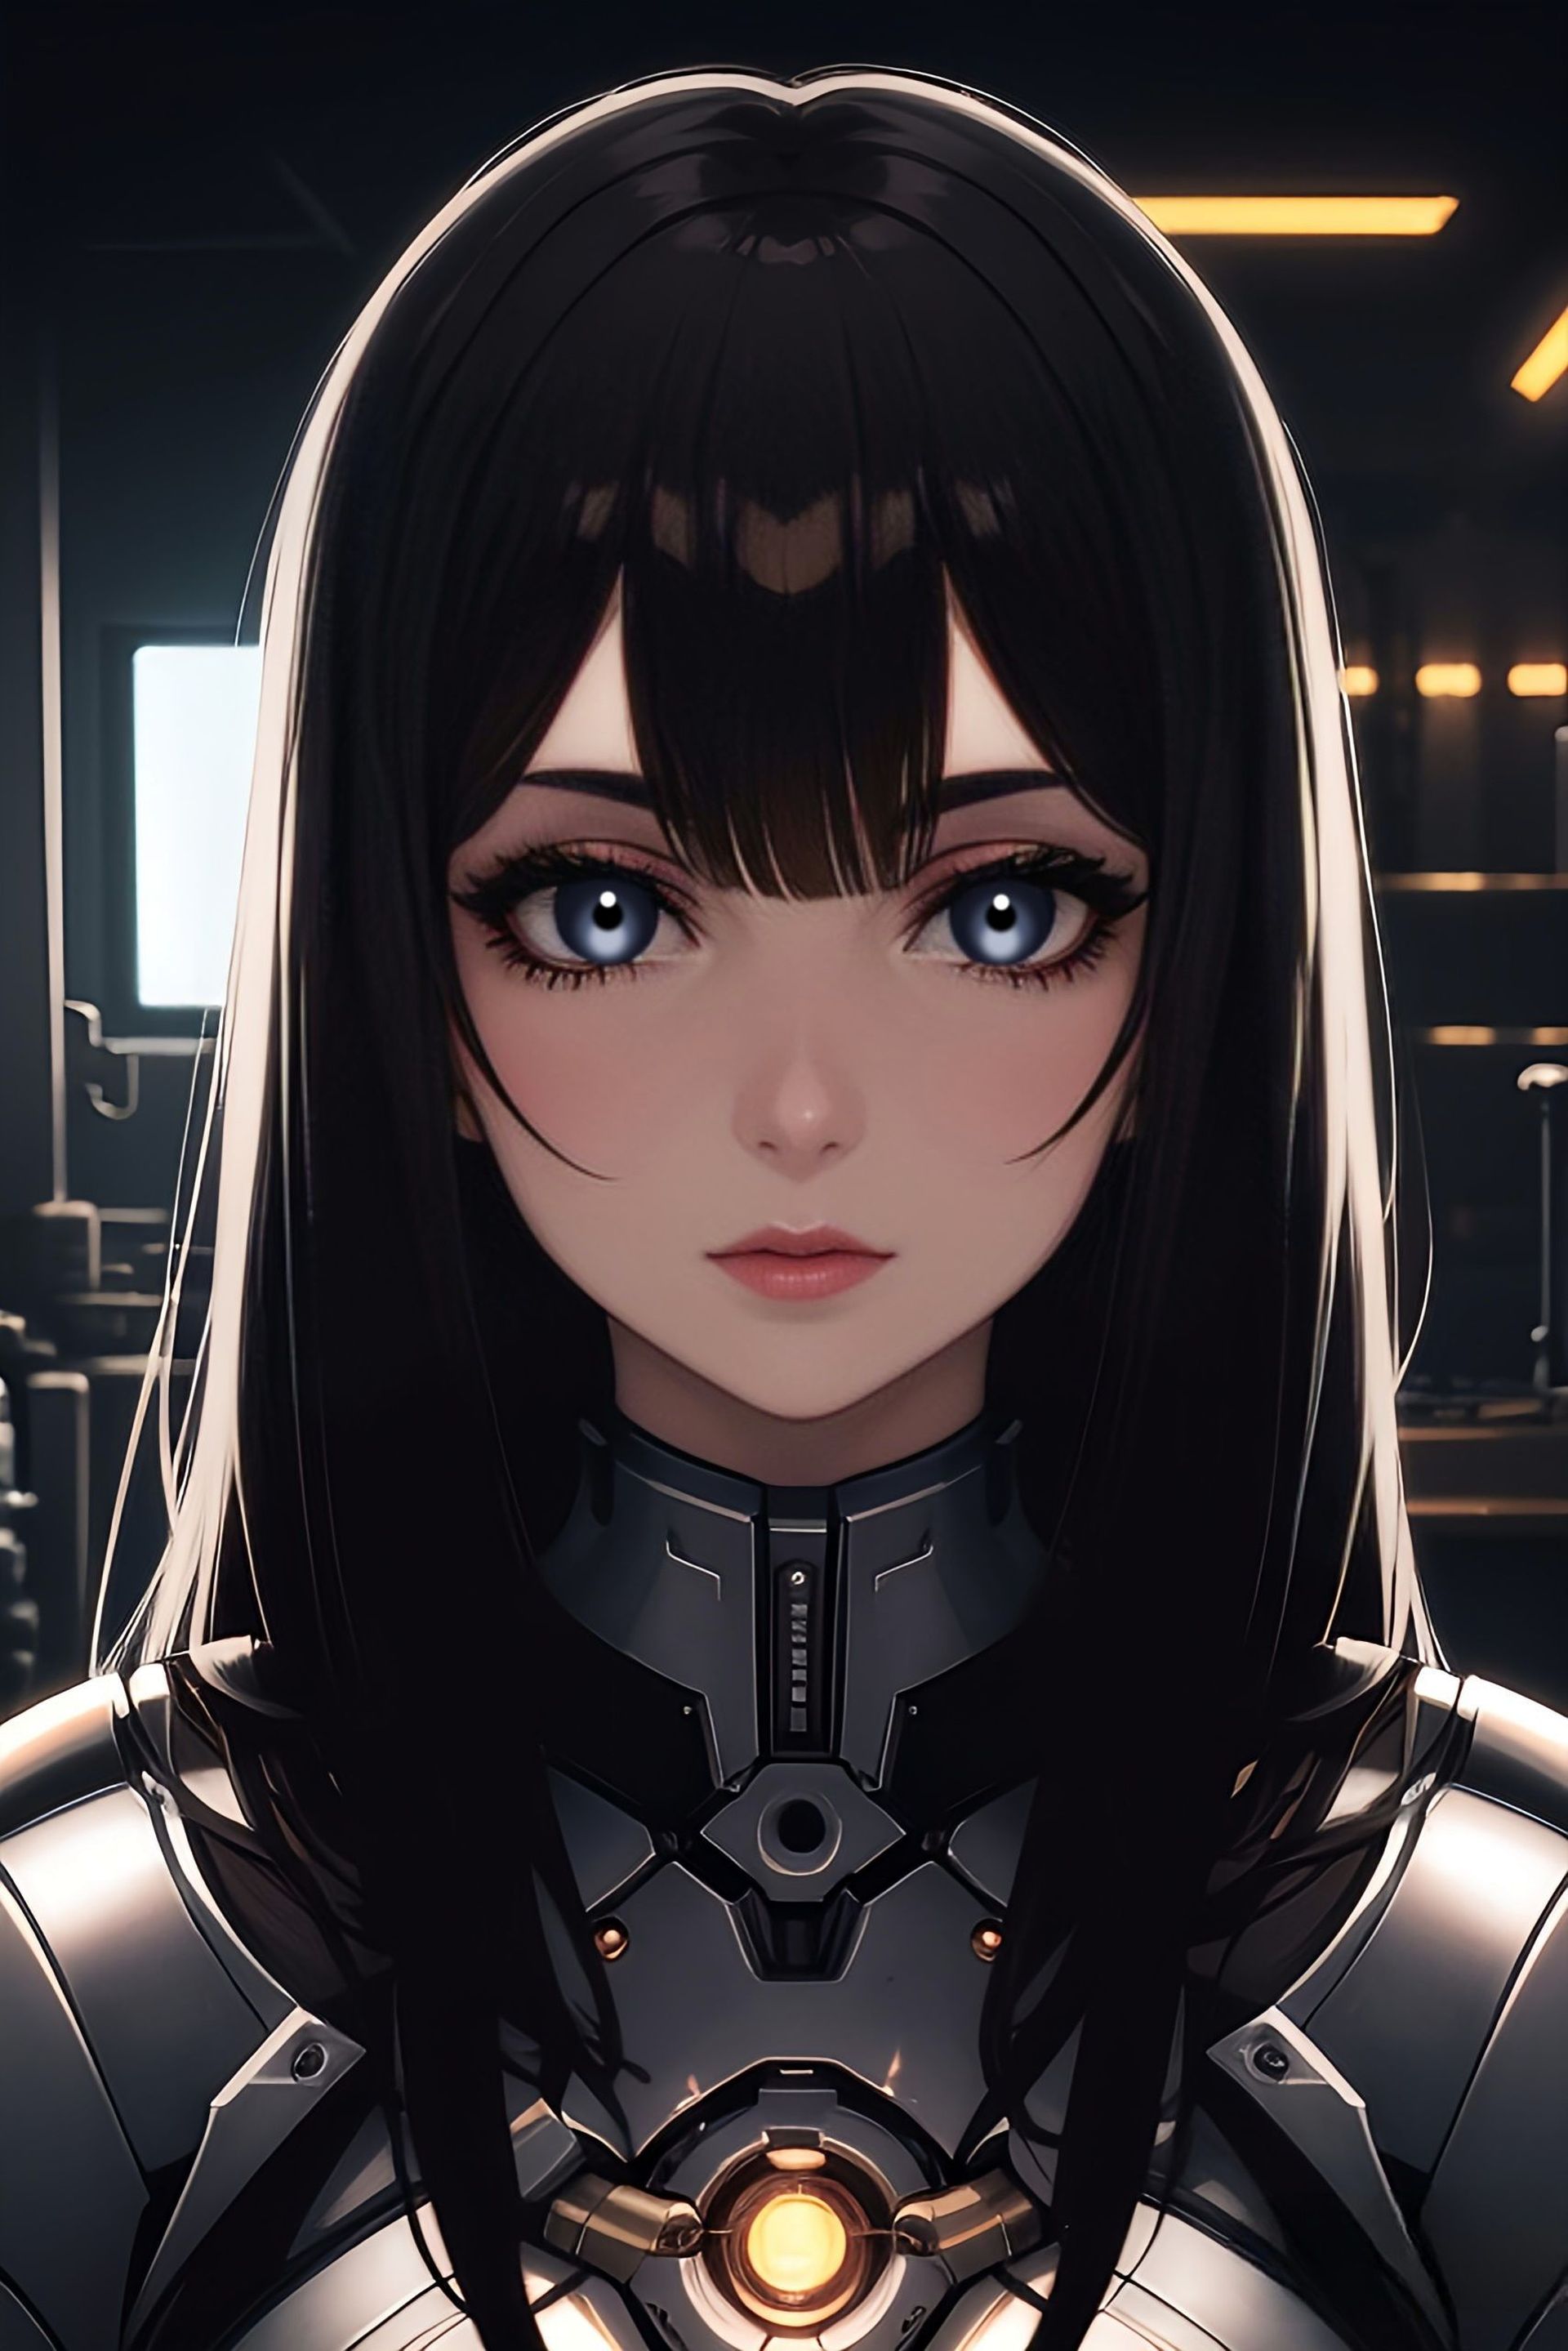 A girl, a robot, with long hair, and gray eyes.